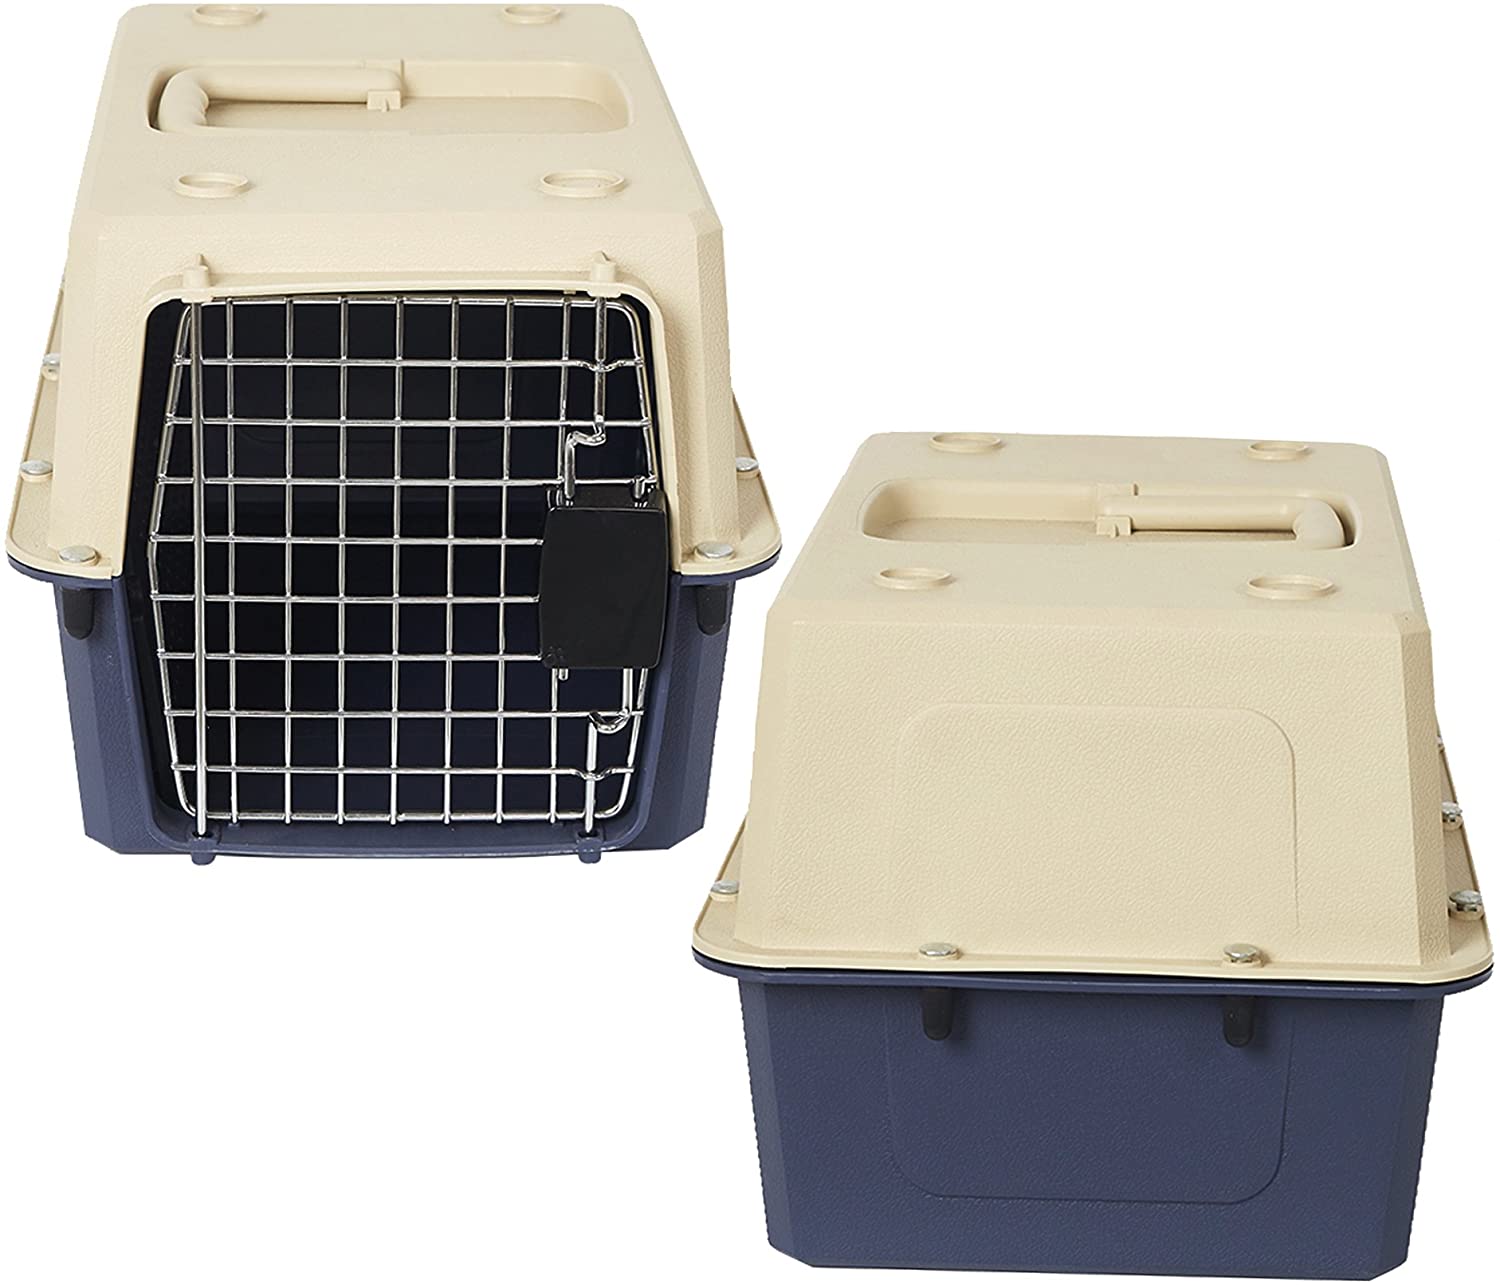 Large Portable Pet Carriers Kennel Crate Airline Approved Kitty Travel Cage for Puppy Bunny Cats, Blue